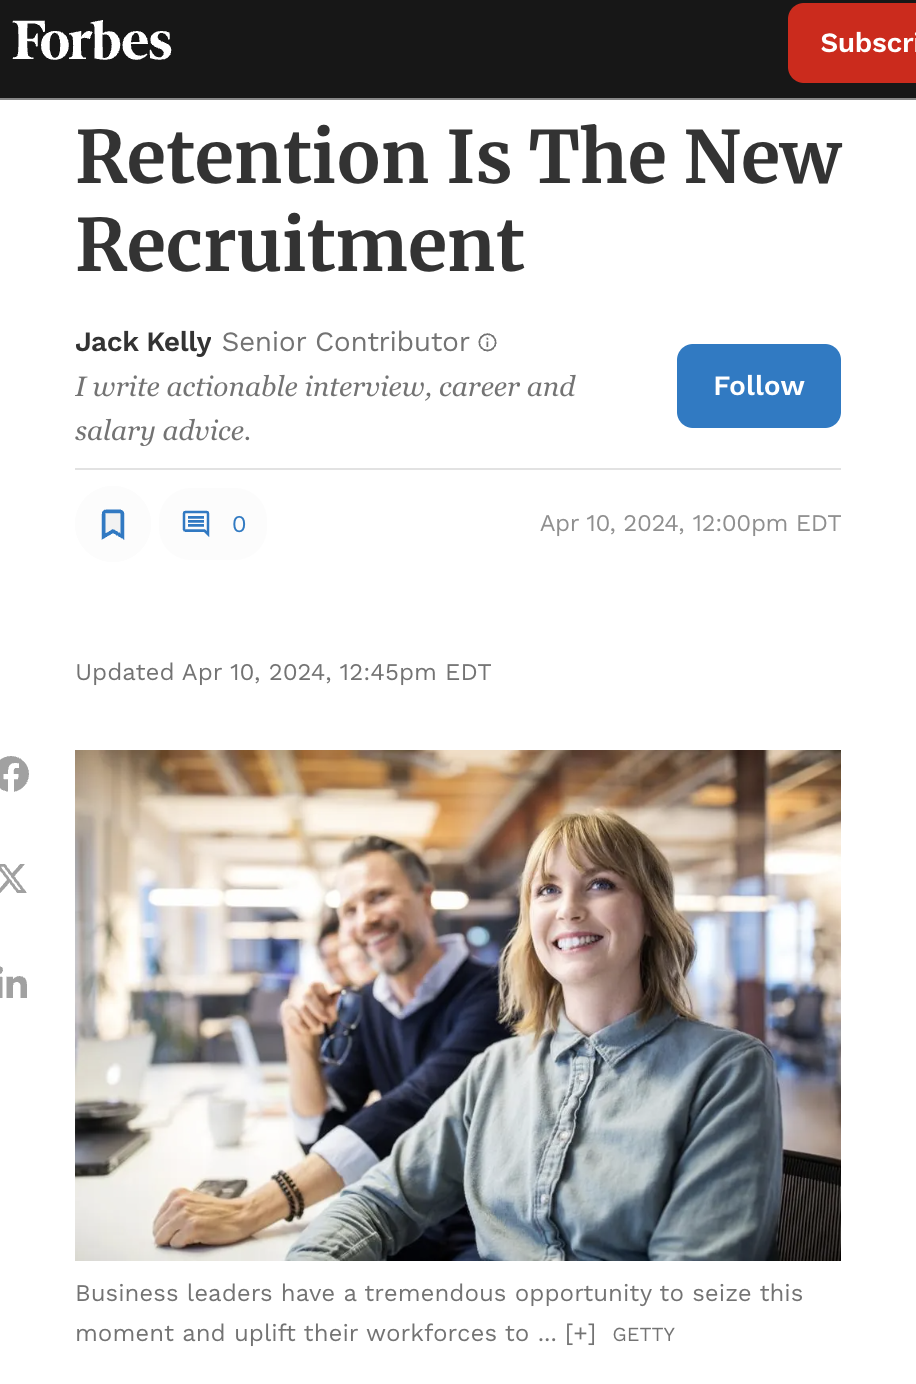 Retention is the New Recruitment - UpDoc Blog - Forbes Cap